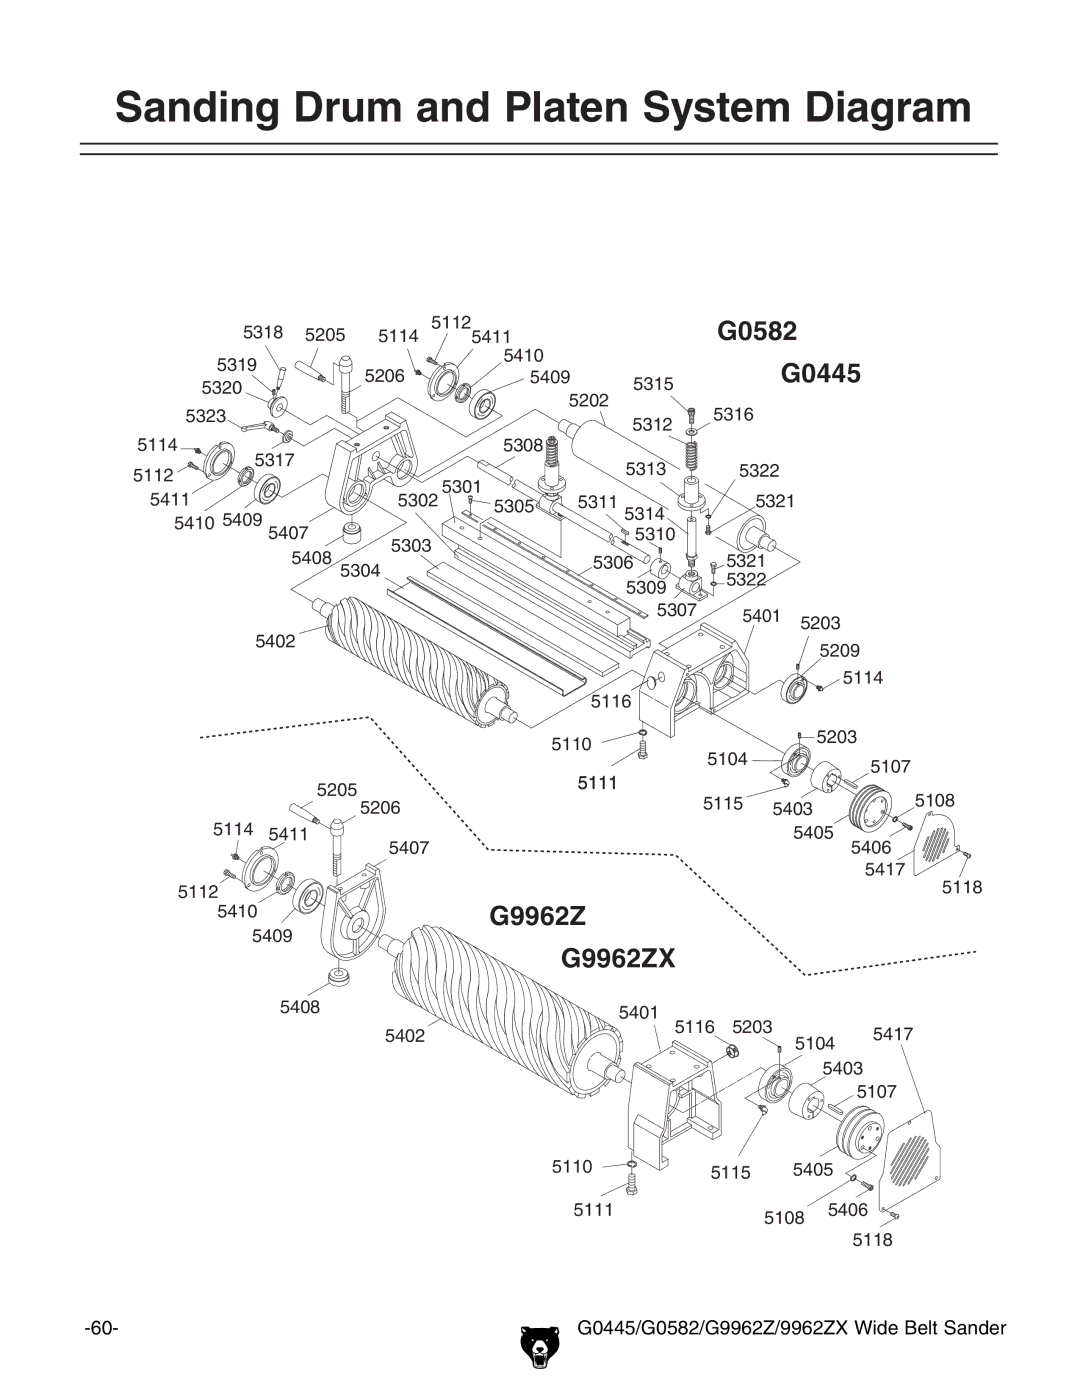 Grizzly 9962ZX, G9962Z, G0582, G0445 instruction manual Sanding Drum and Platen System Diagram 